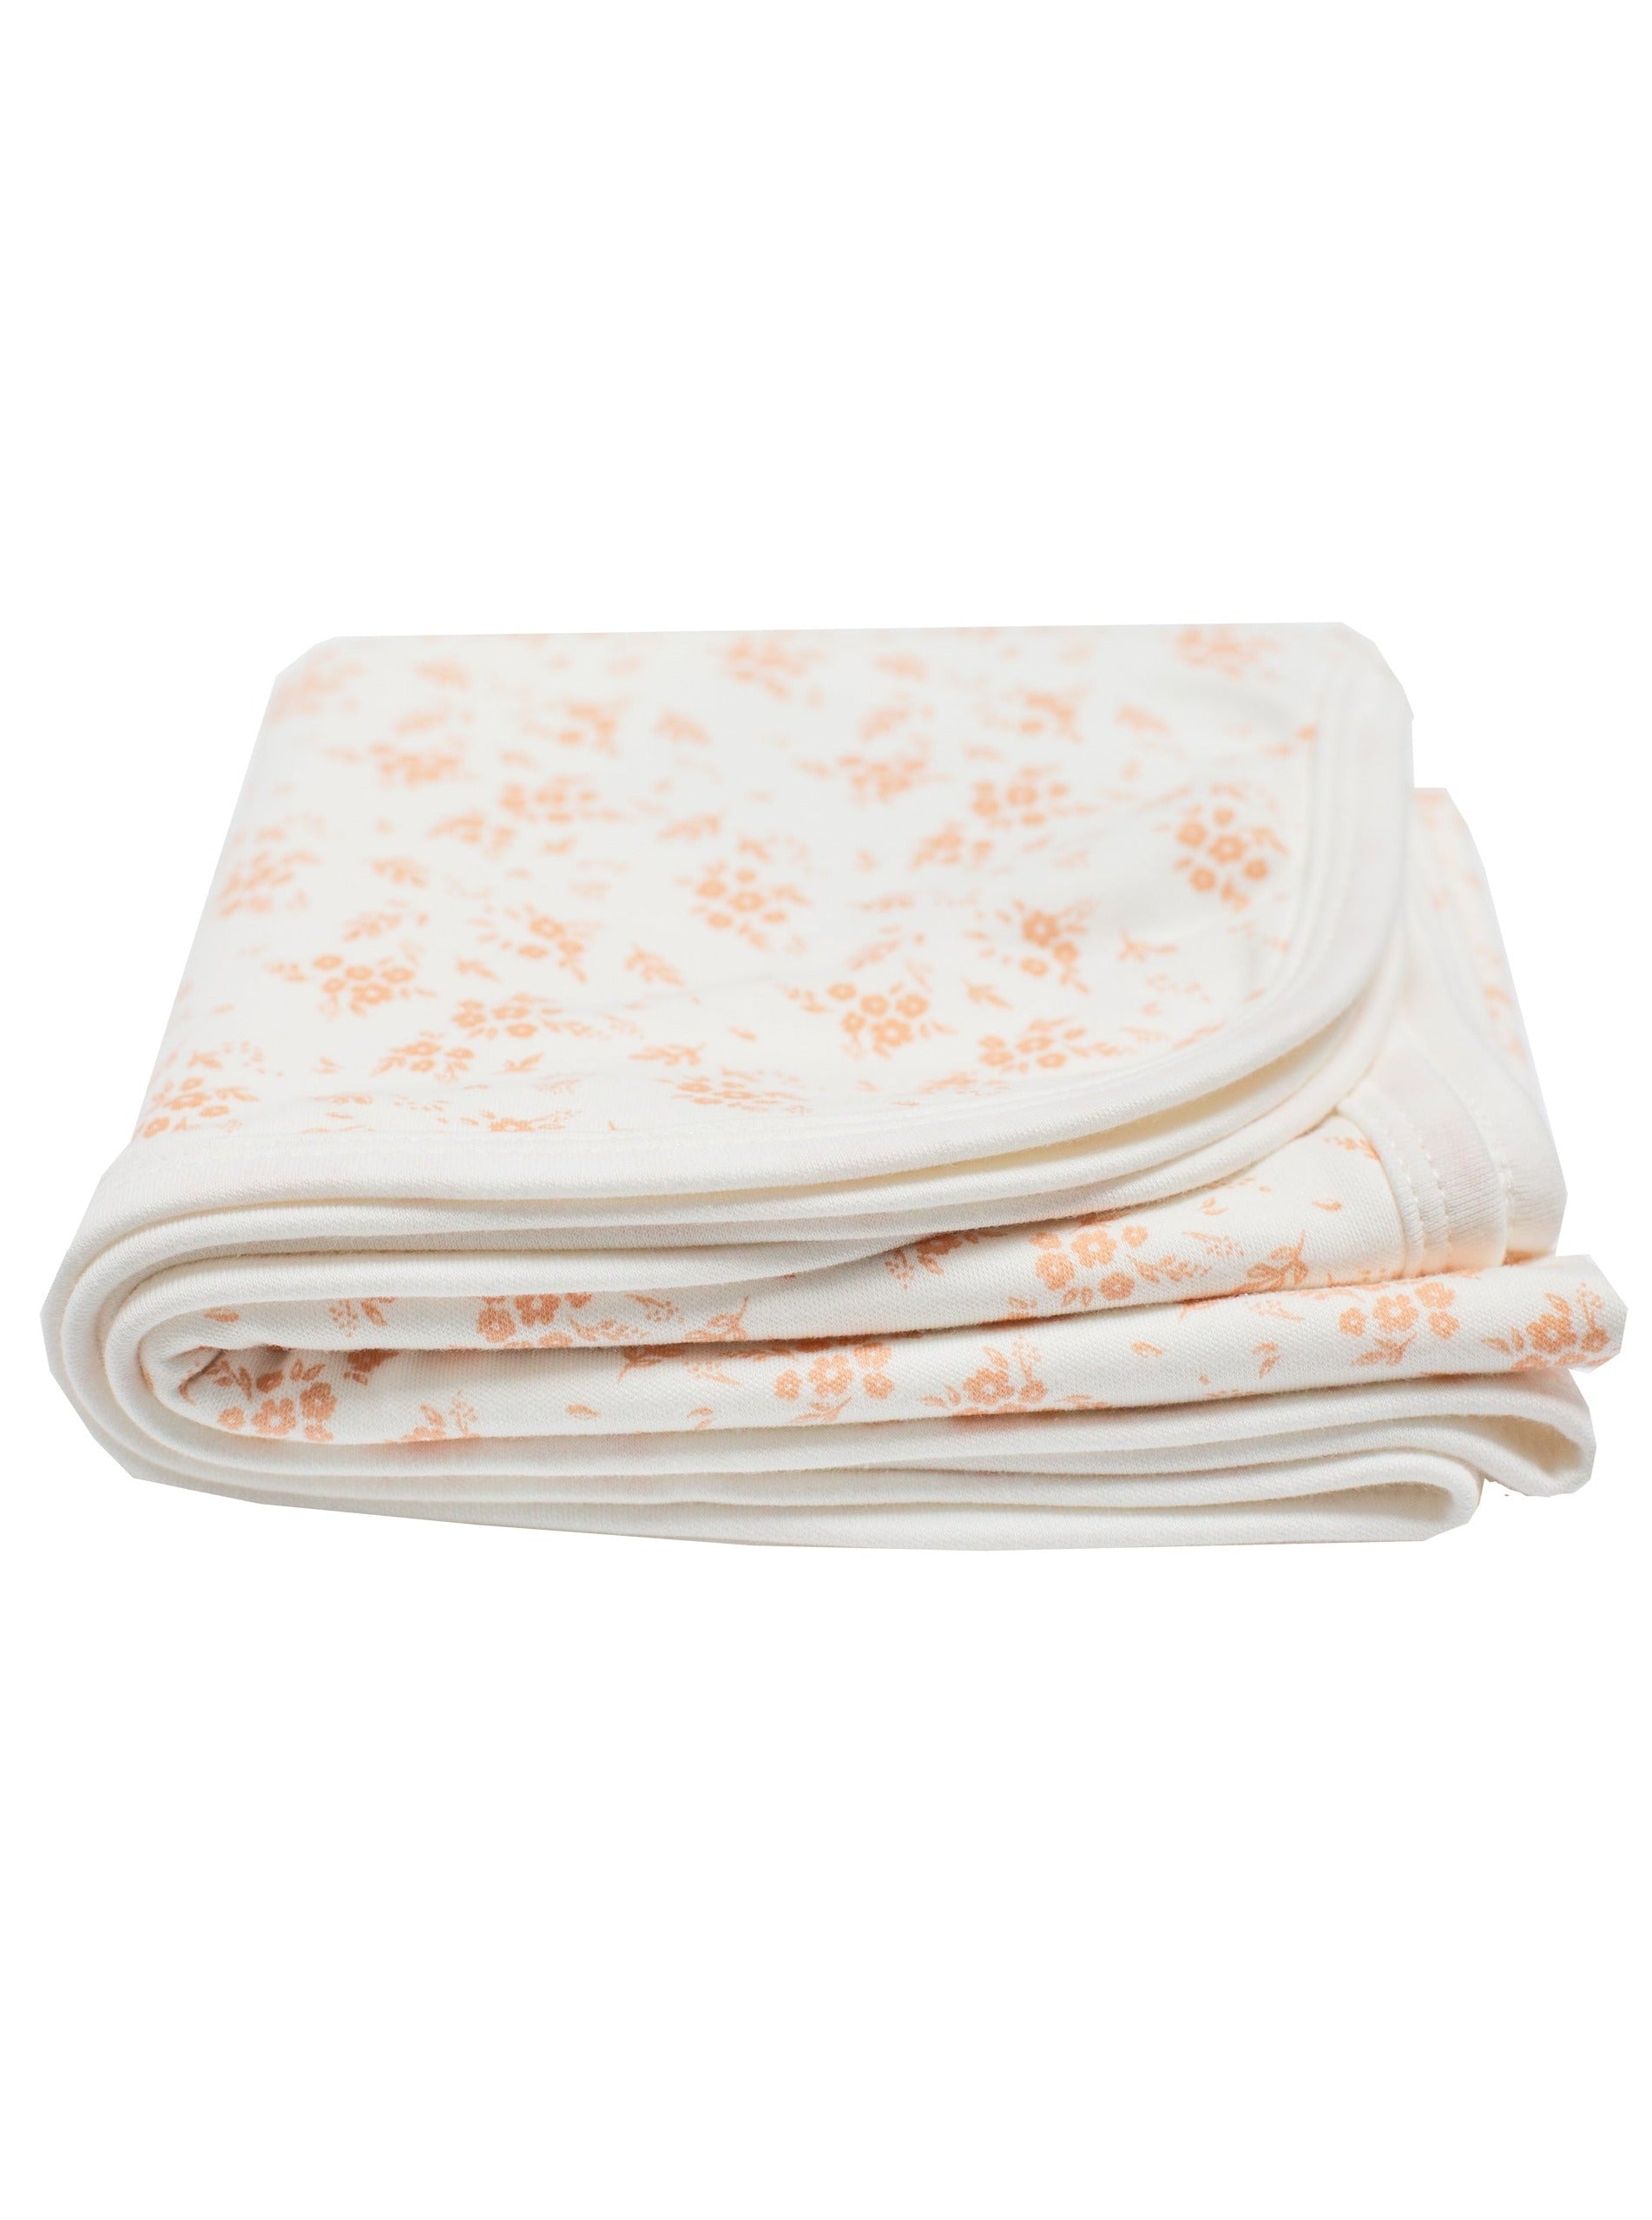 Organic Cotton Baby Blanket, Apricot Floral Blanket Tiny & Small 